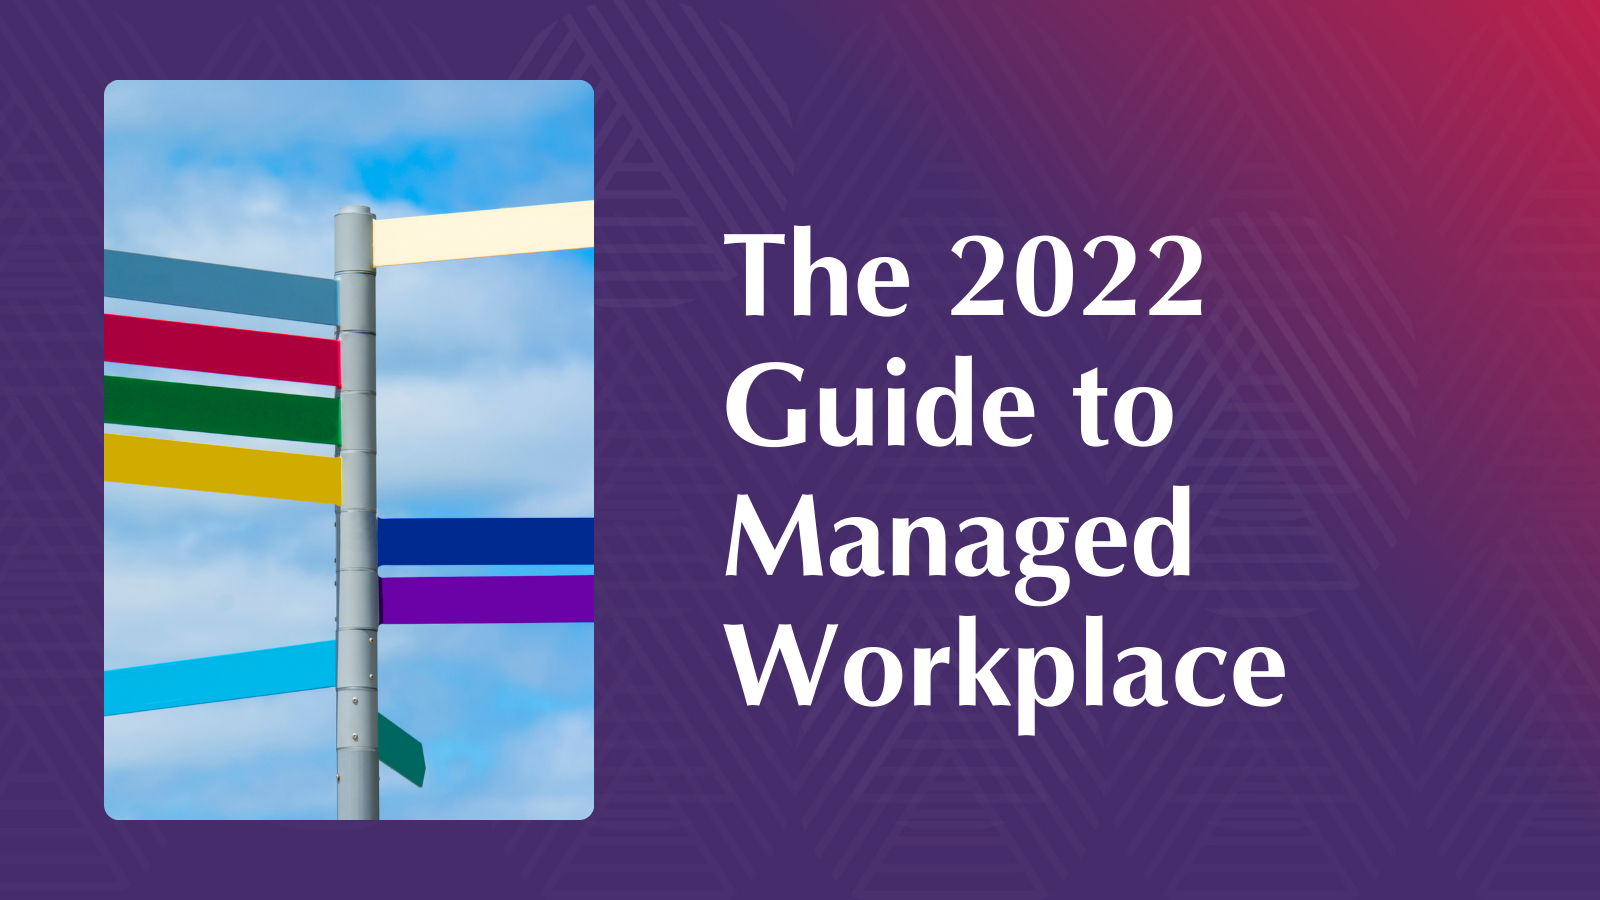 The 2022 Guide to Managed Workplace